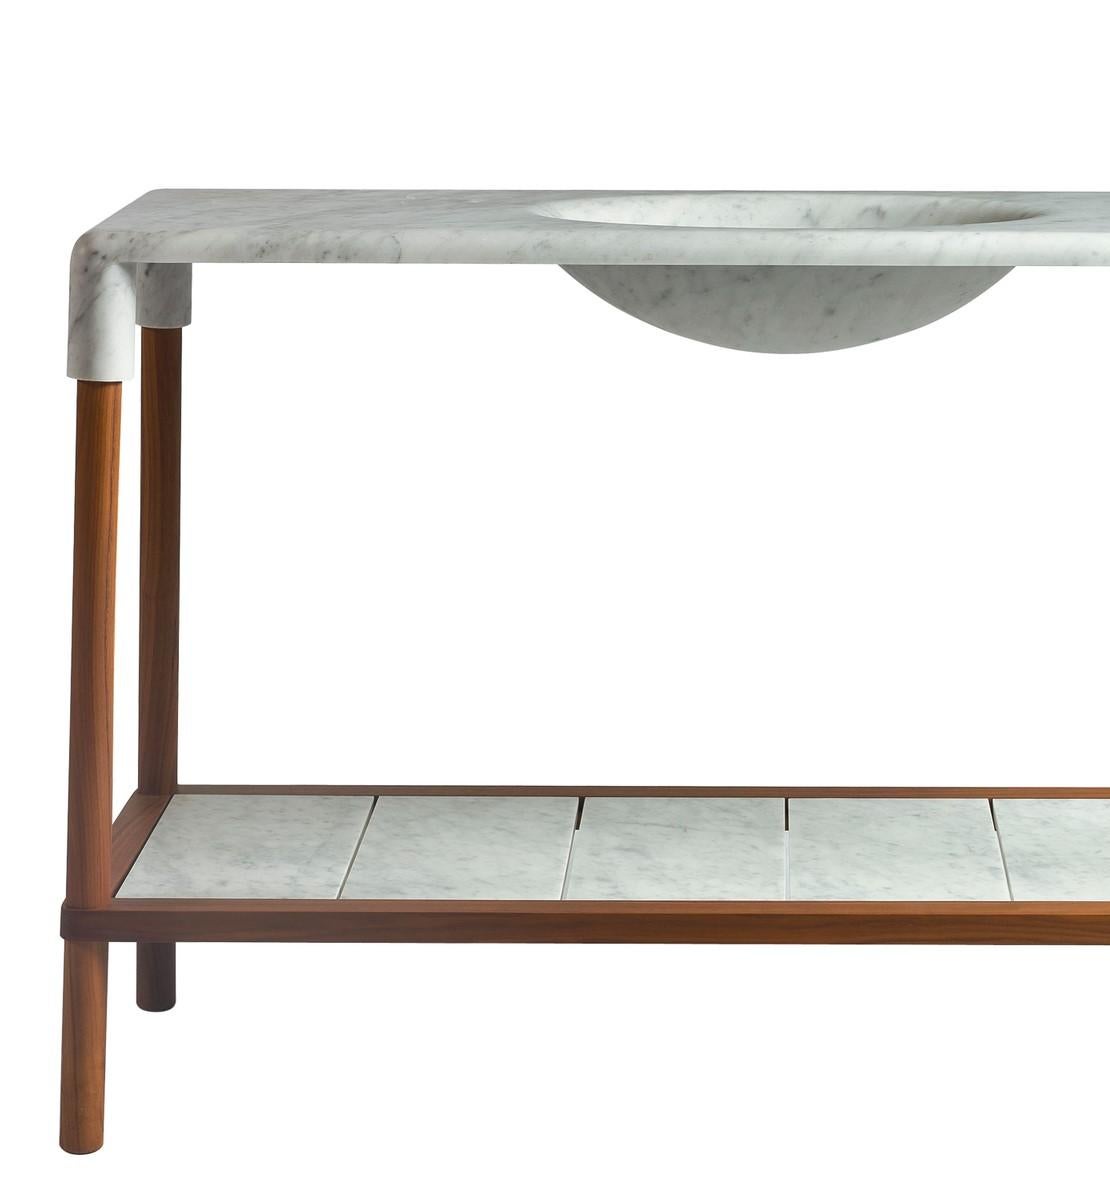 Designed by Gritti Rollo, this elegant console is part of the Oslo collection, an elegant series of pieces of midcentury inspiration that boast a top in marble bending at the corners to enclose the structure in walnut. The standout element of this